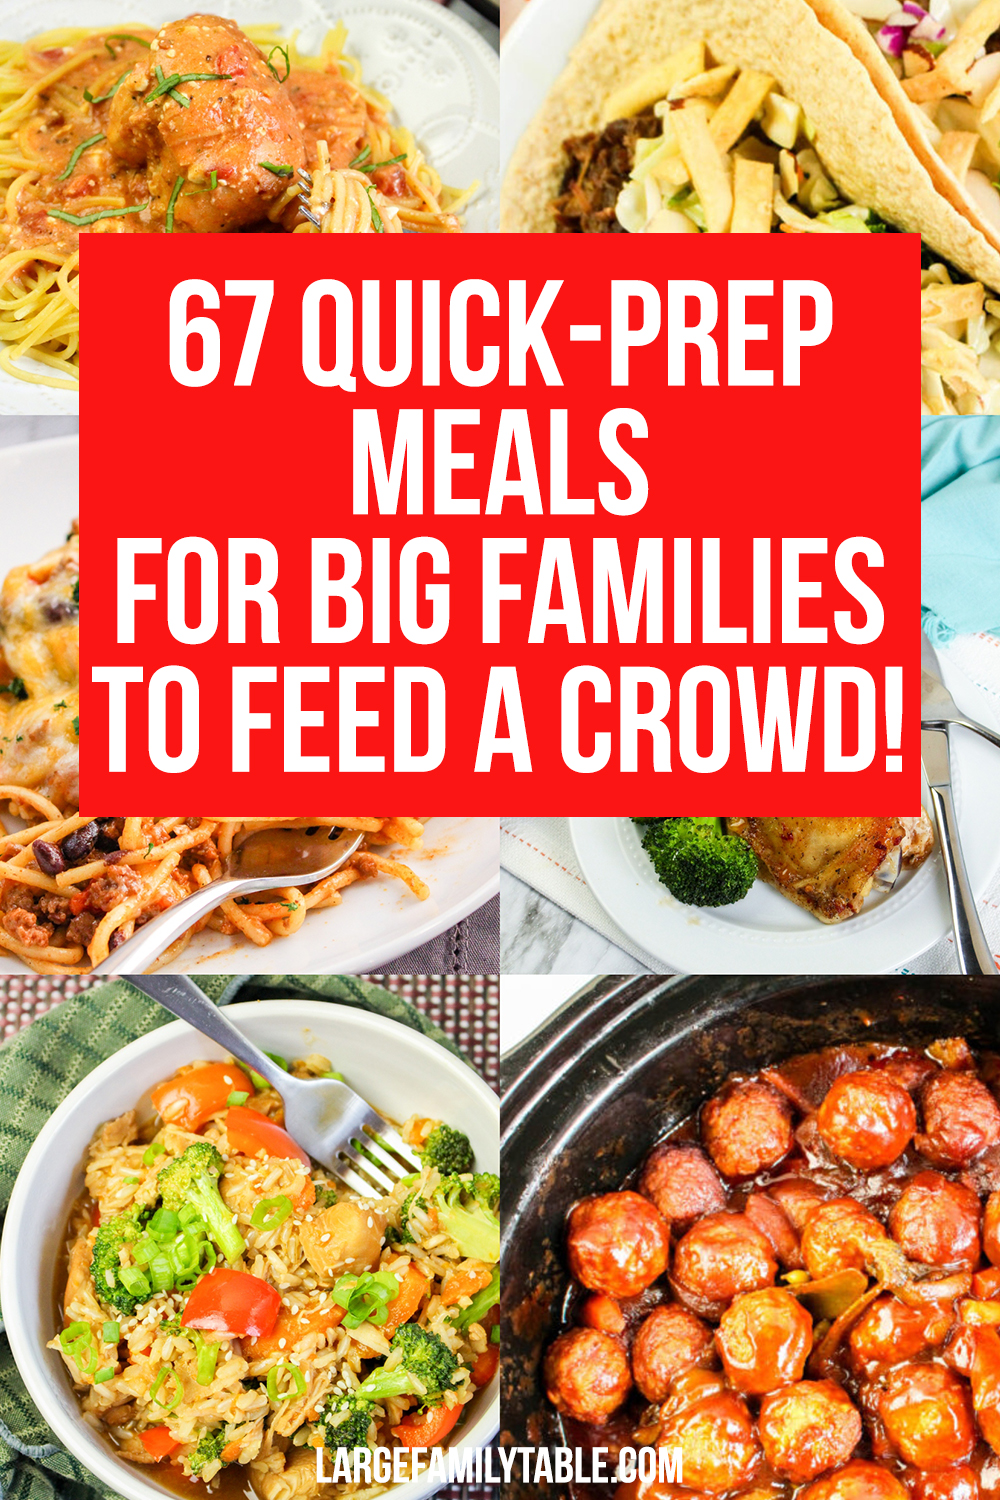 67-Quick-Prep-Meals-for-Big-Families-to-Feed-a-Crowd